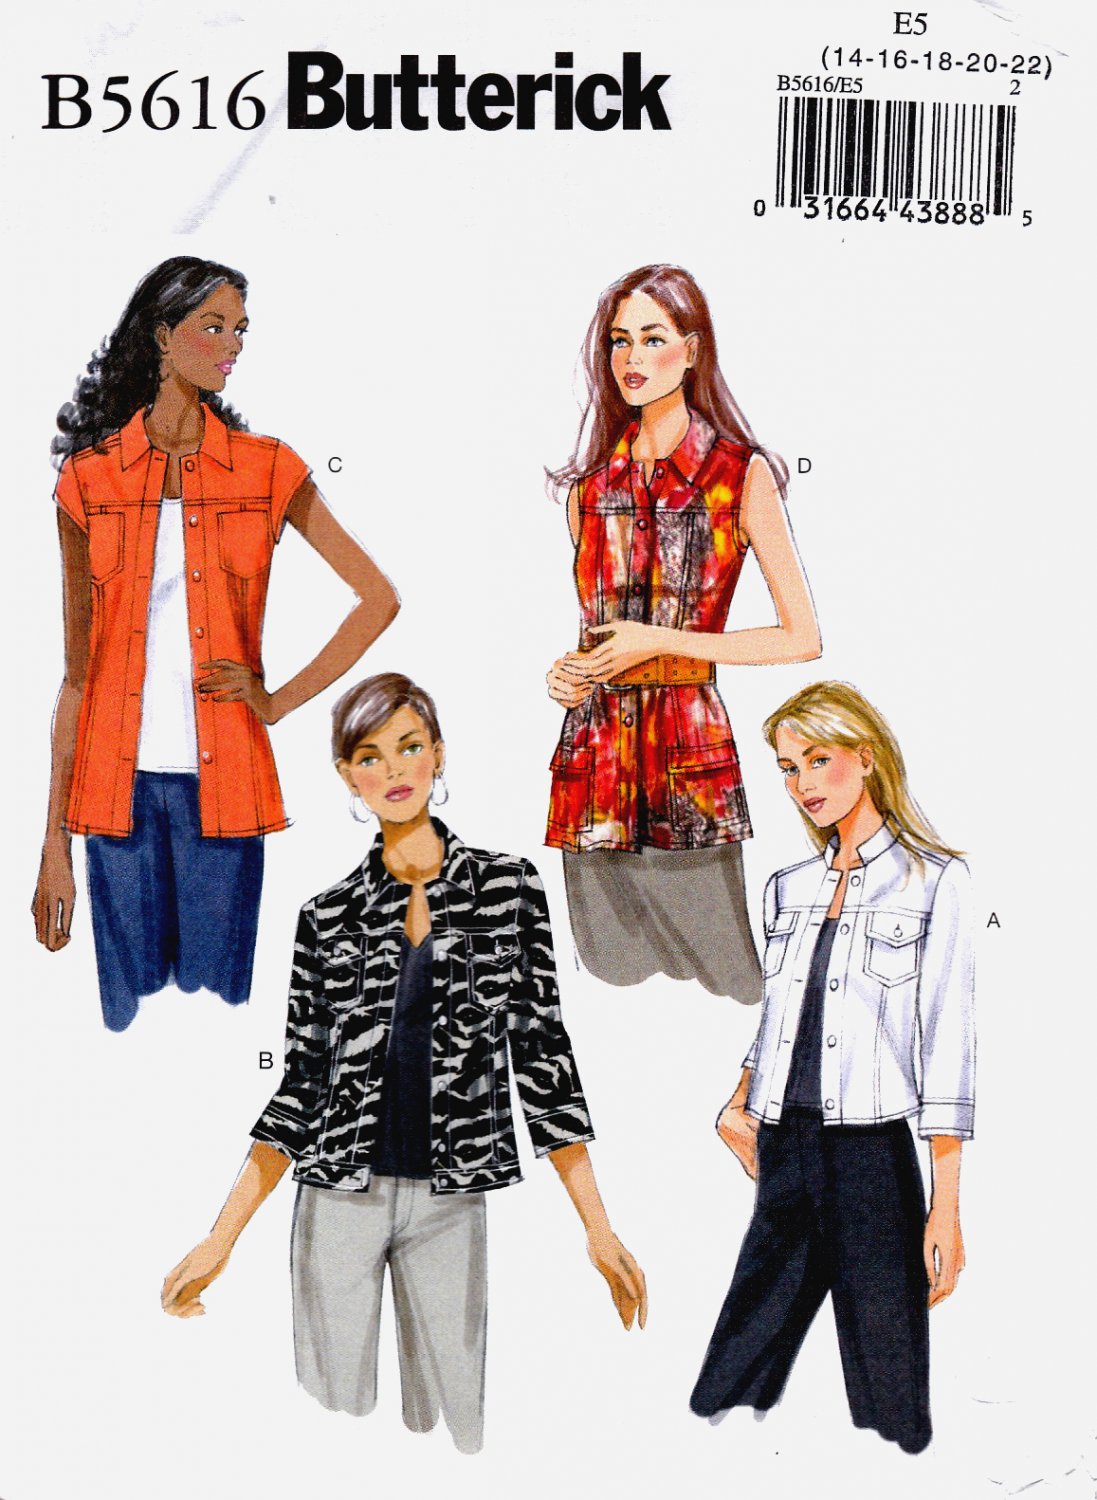 Butterick B5616 Misses Womens Jackets Three Lengths Sleeves Vary Sewing Pattern Sizes 14-16-18-20-22